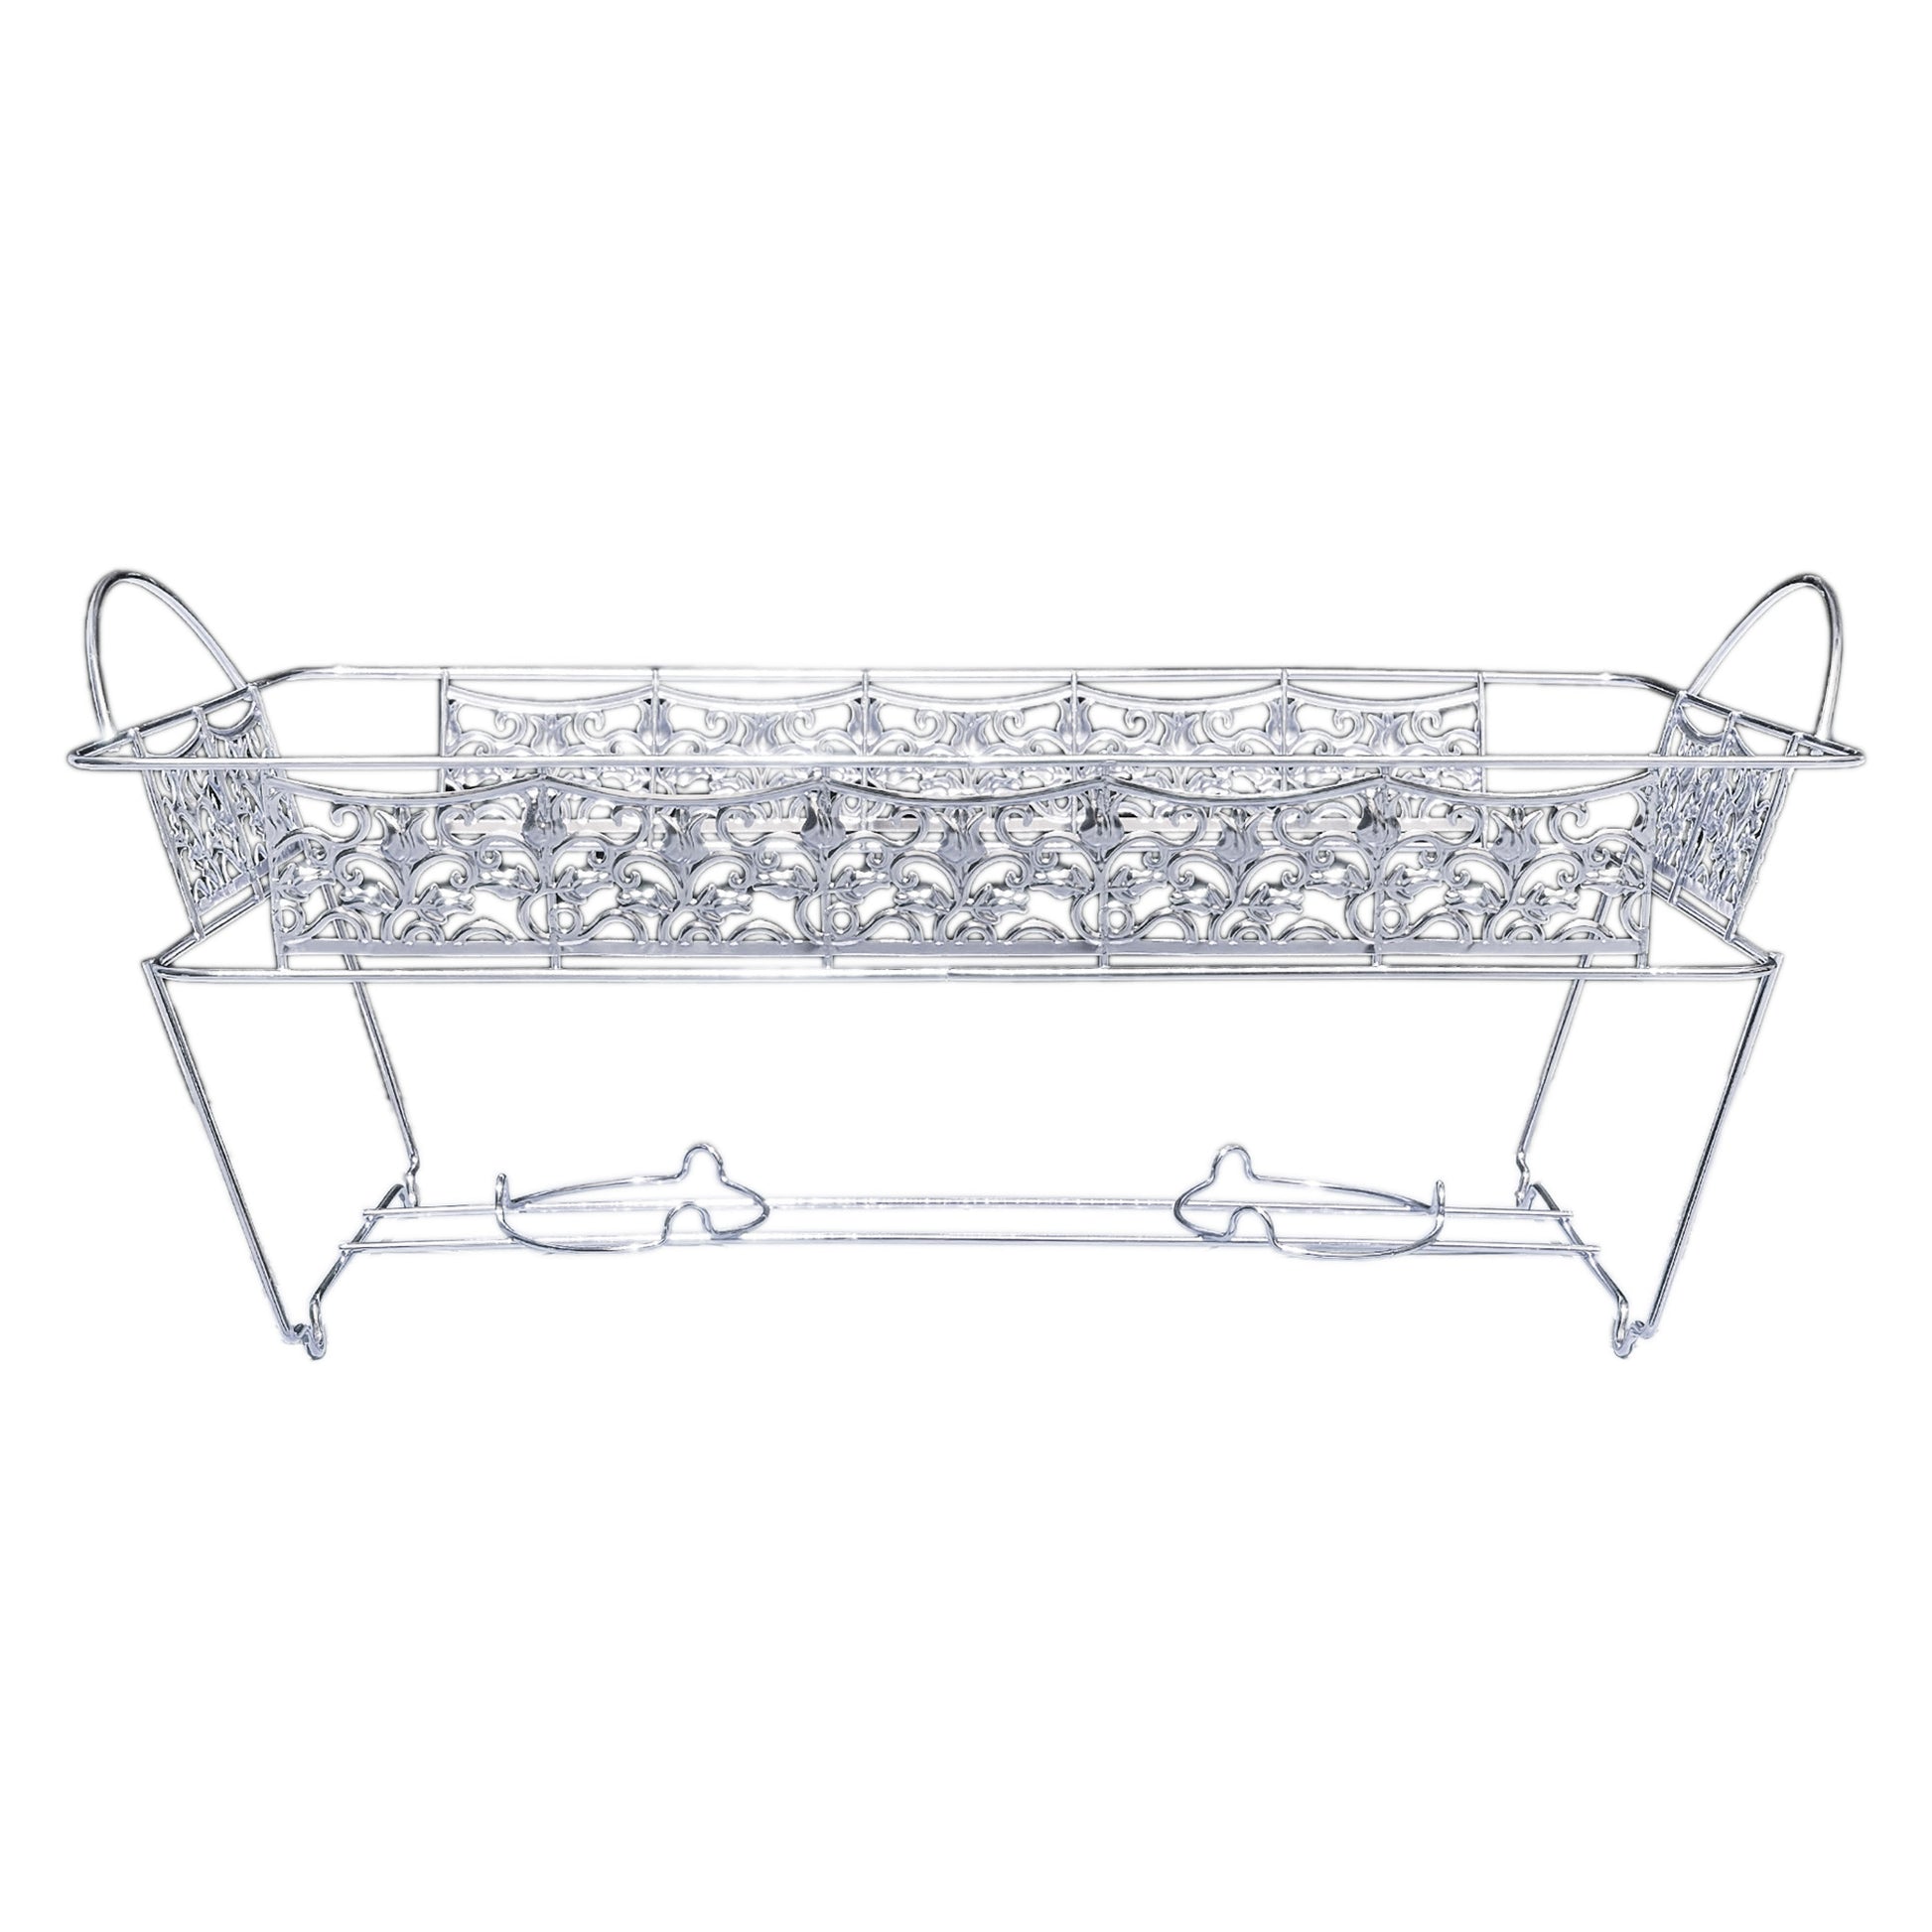 Hanna K. Signature Elements Decorative Disposable Silver Chafing Rack Disposable Hanna K   